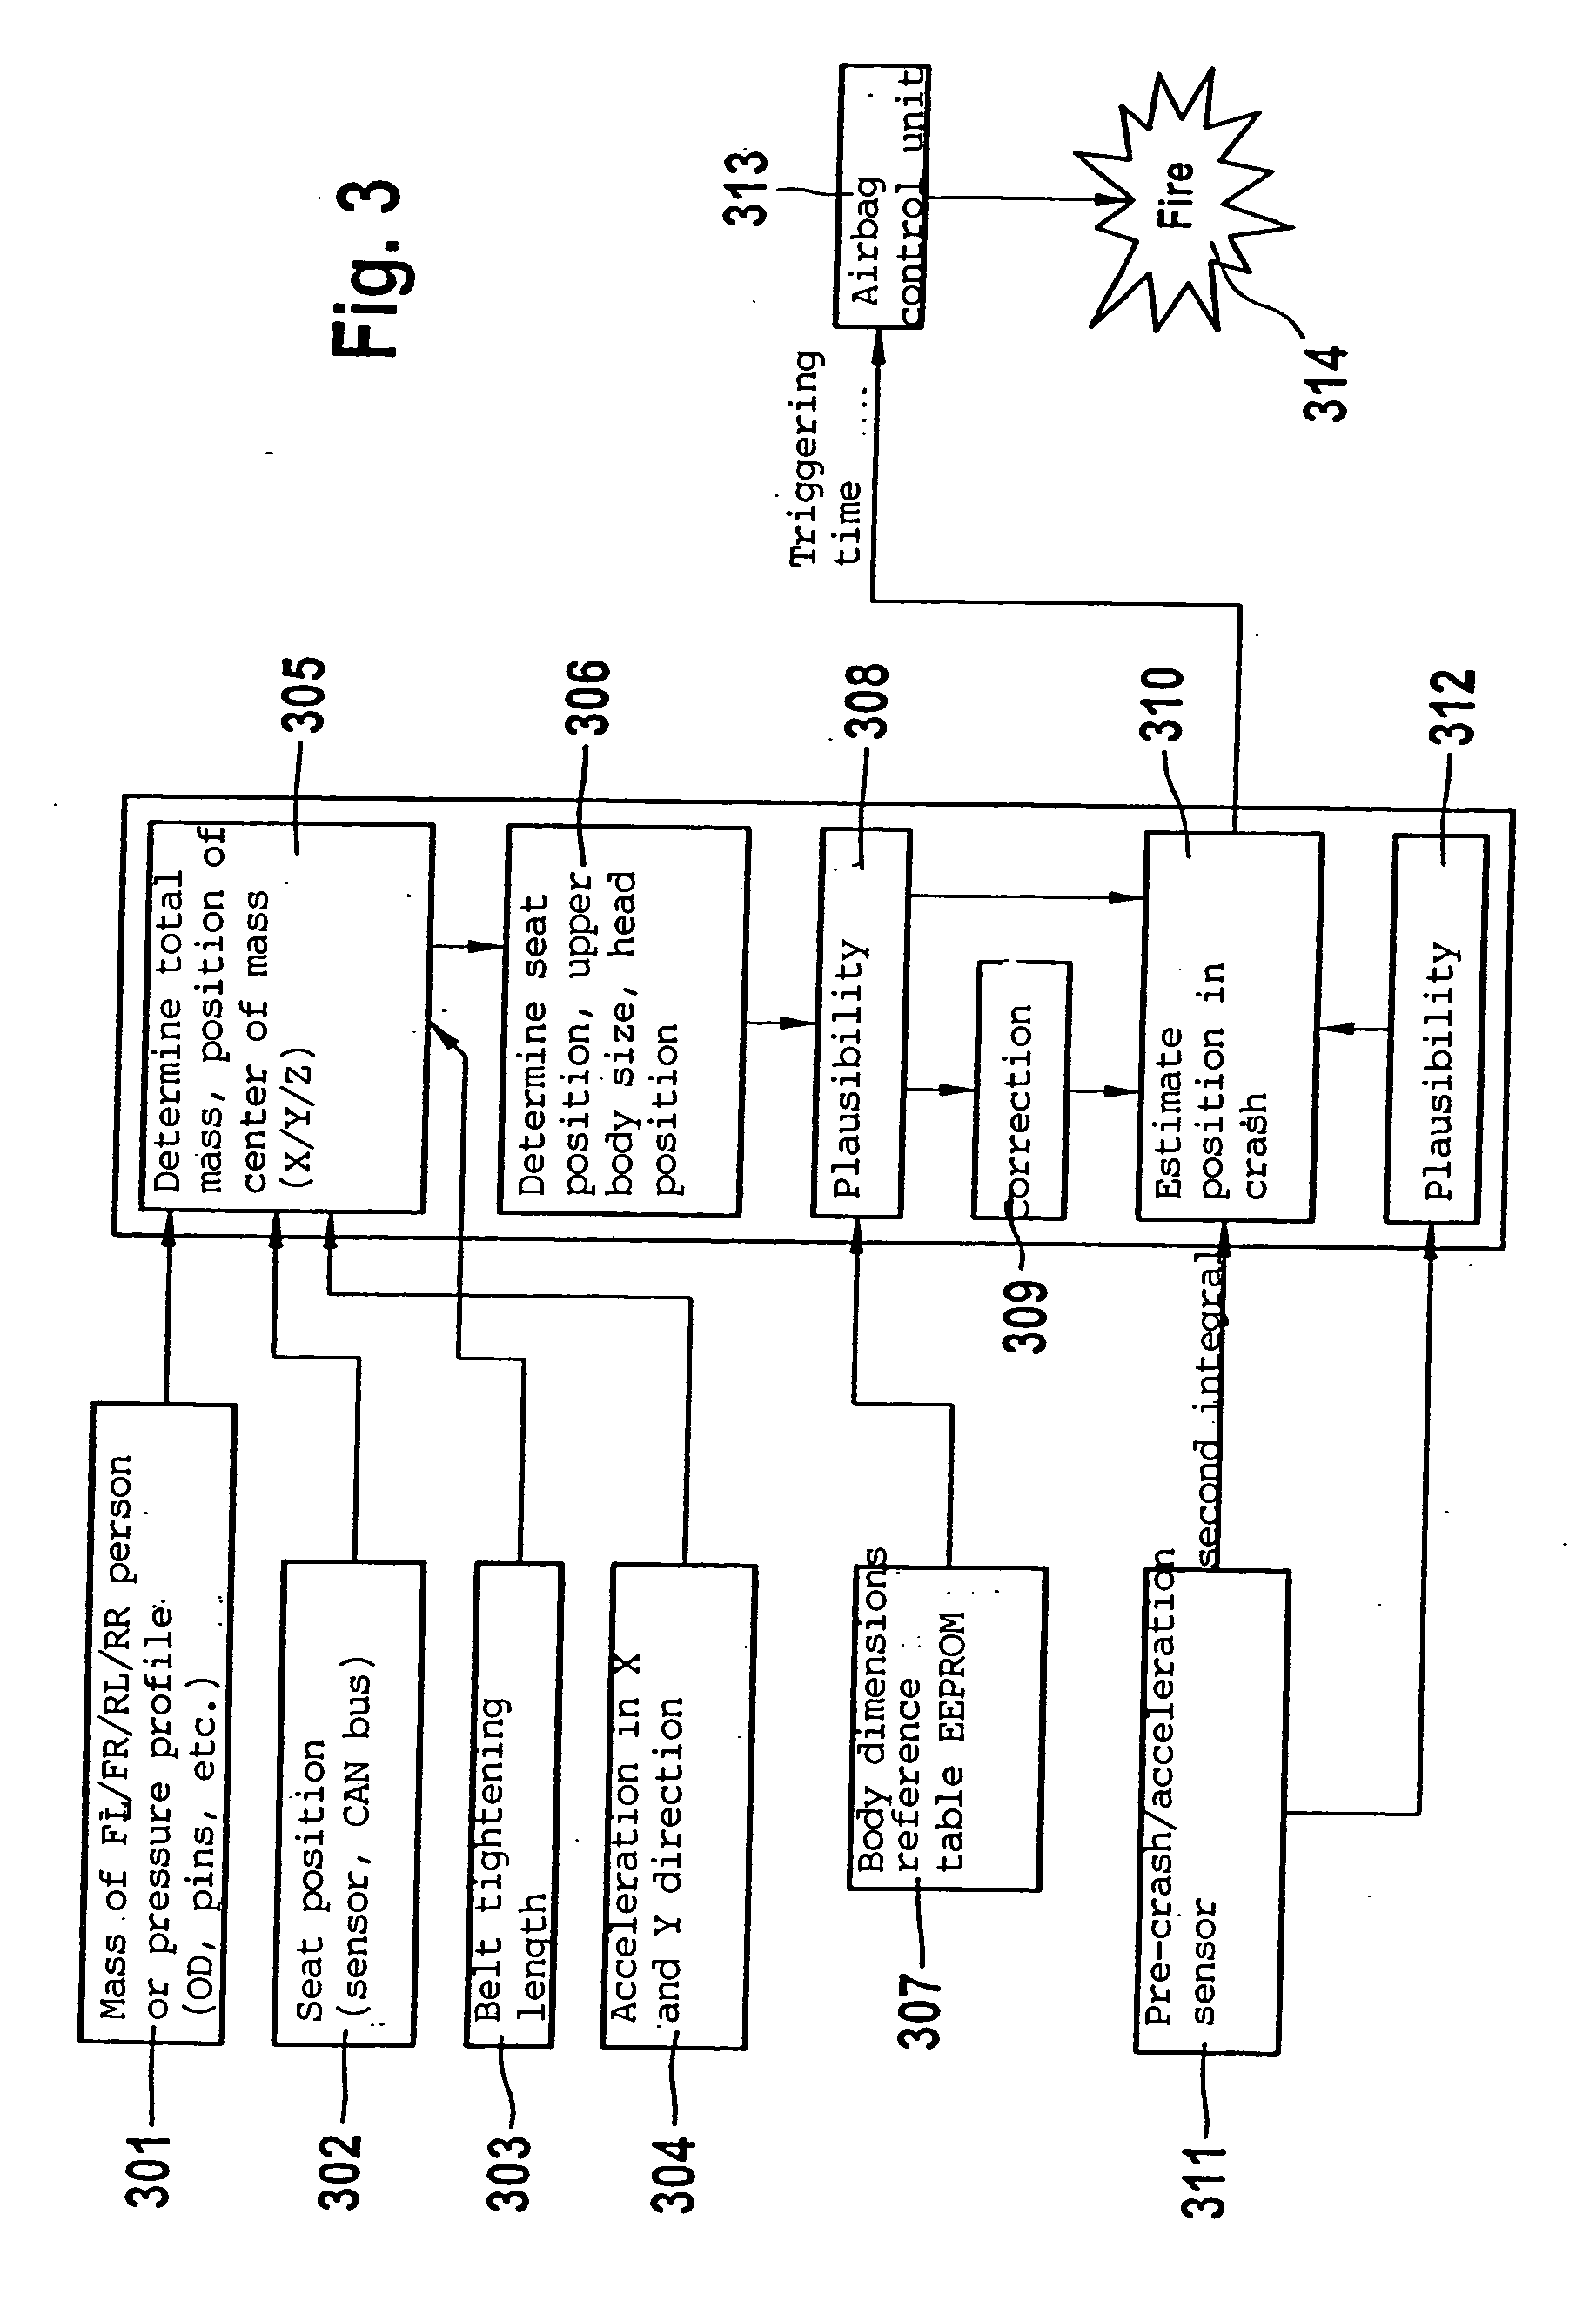 Device for the protection of a vehicle occupant